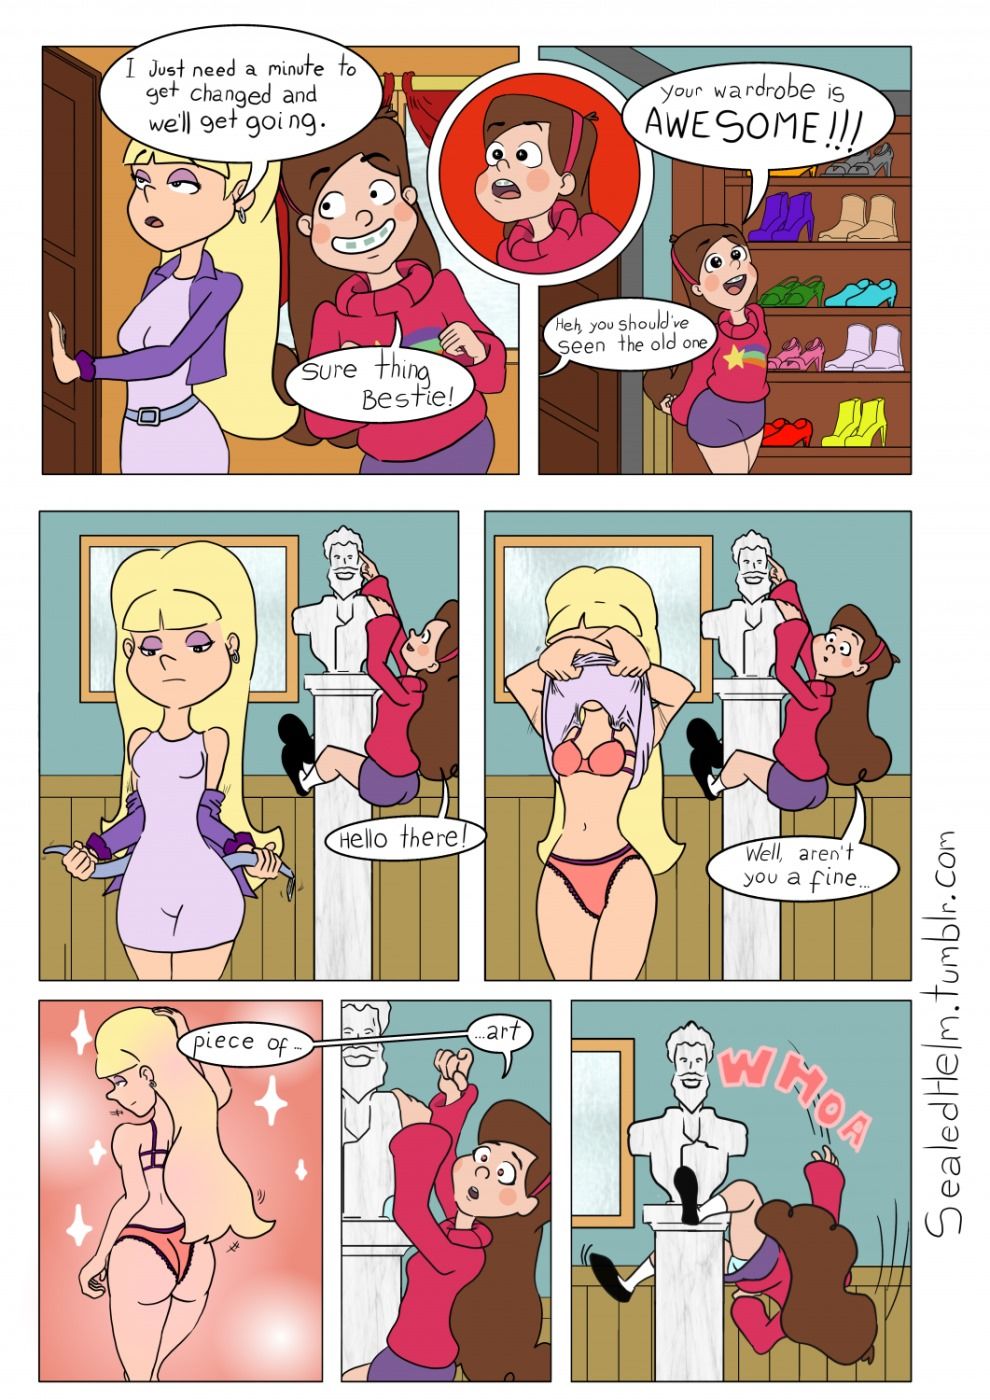 [Sealedhelm] Gravity Falls - Mabel x Pacifica page 1